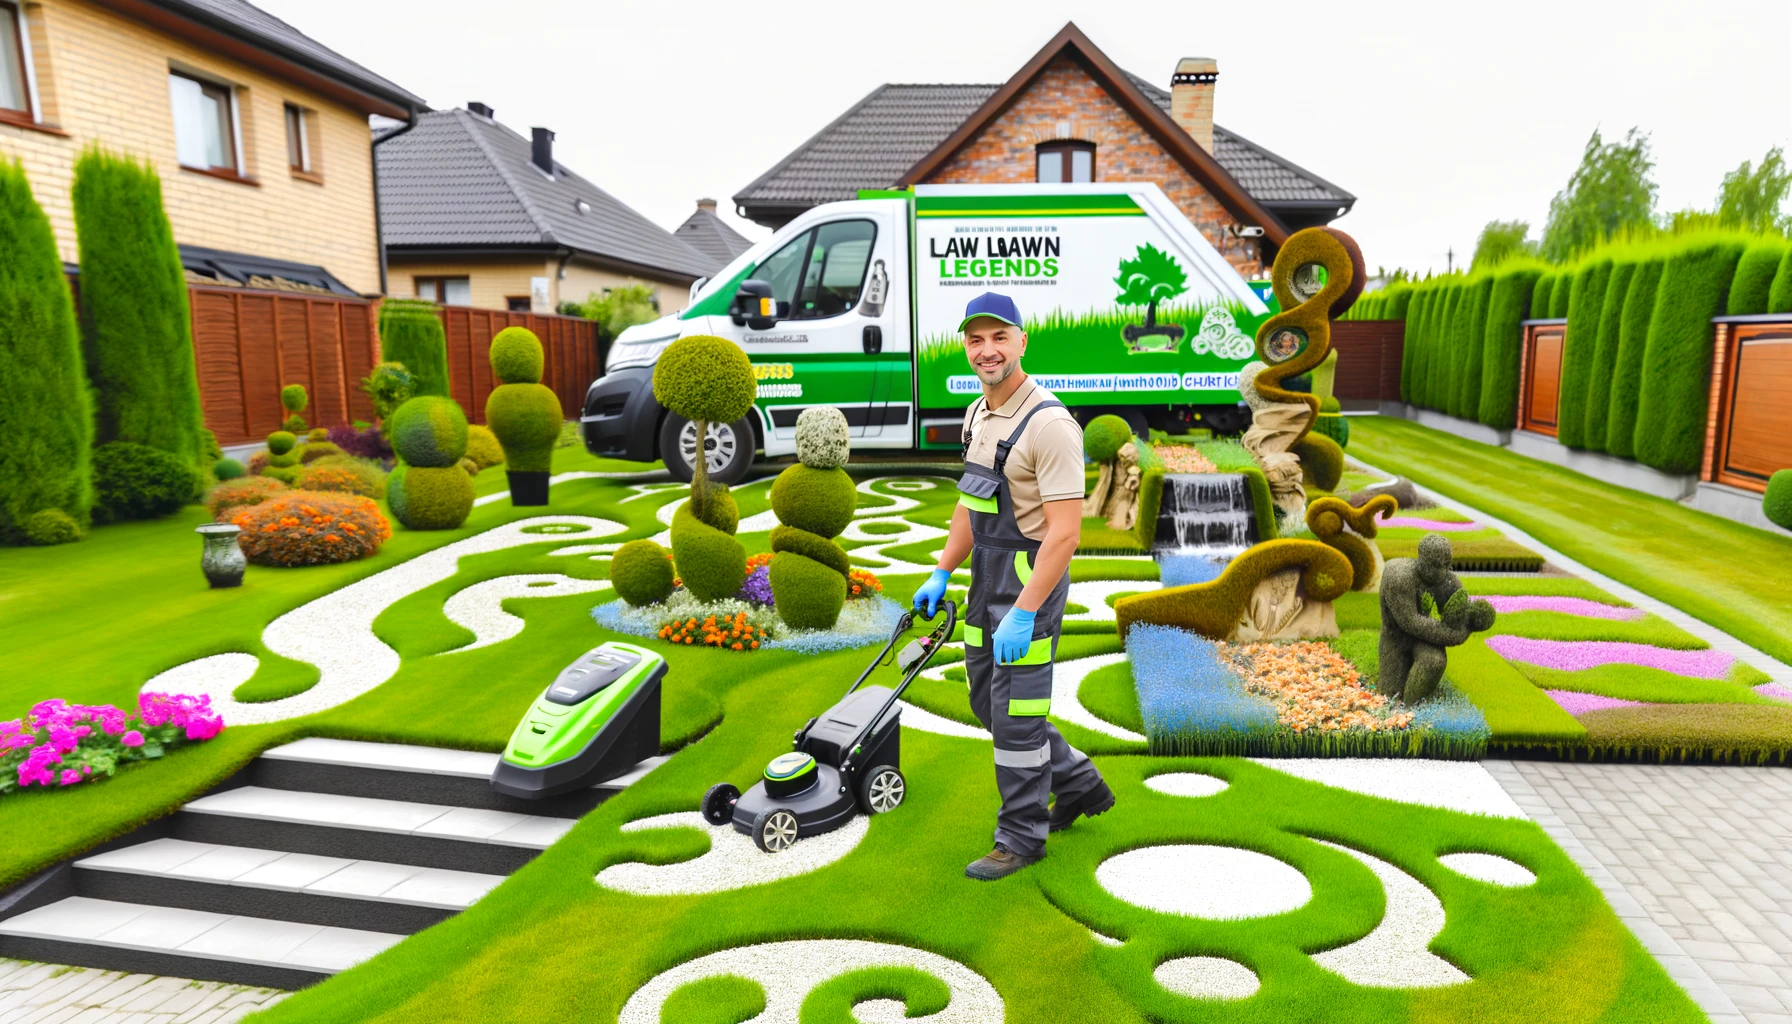 Lawn maintenance business name